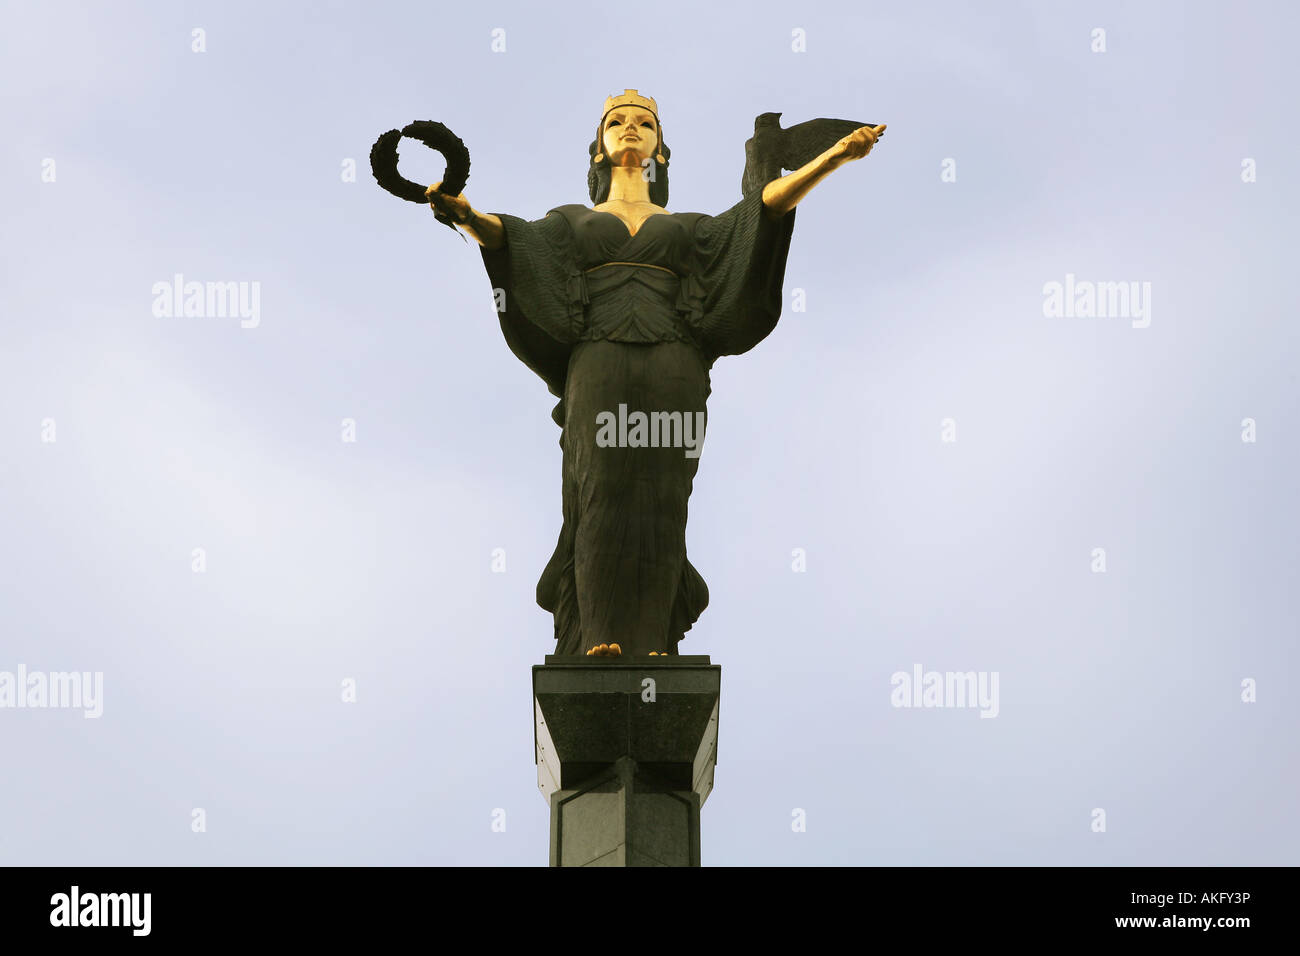 The statue of Sofia guarding and protecting the city of Sofia in Bulgaria The symbols represent fame and wisdom Stock Photo